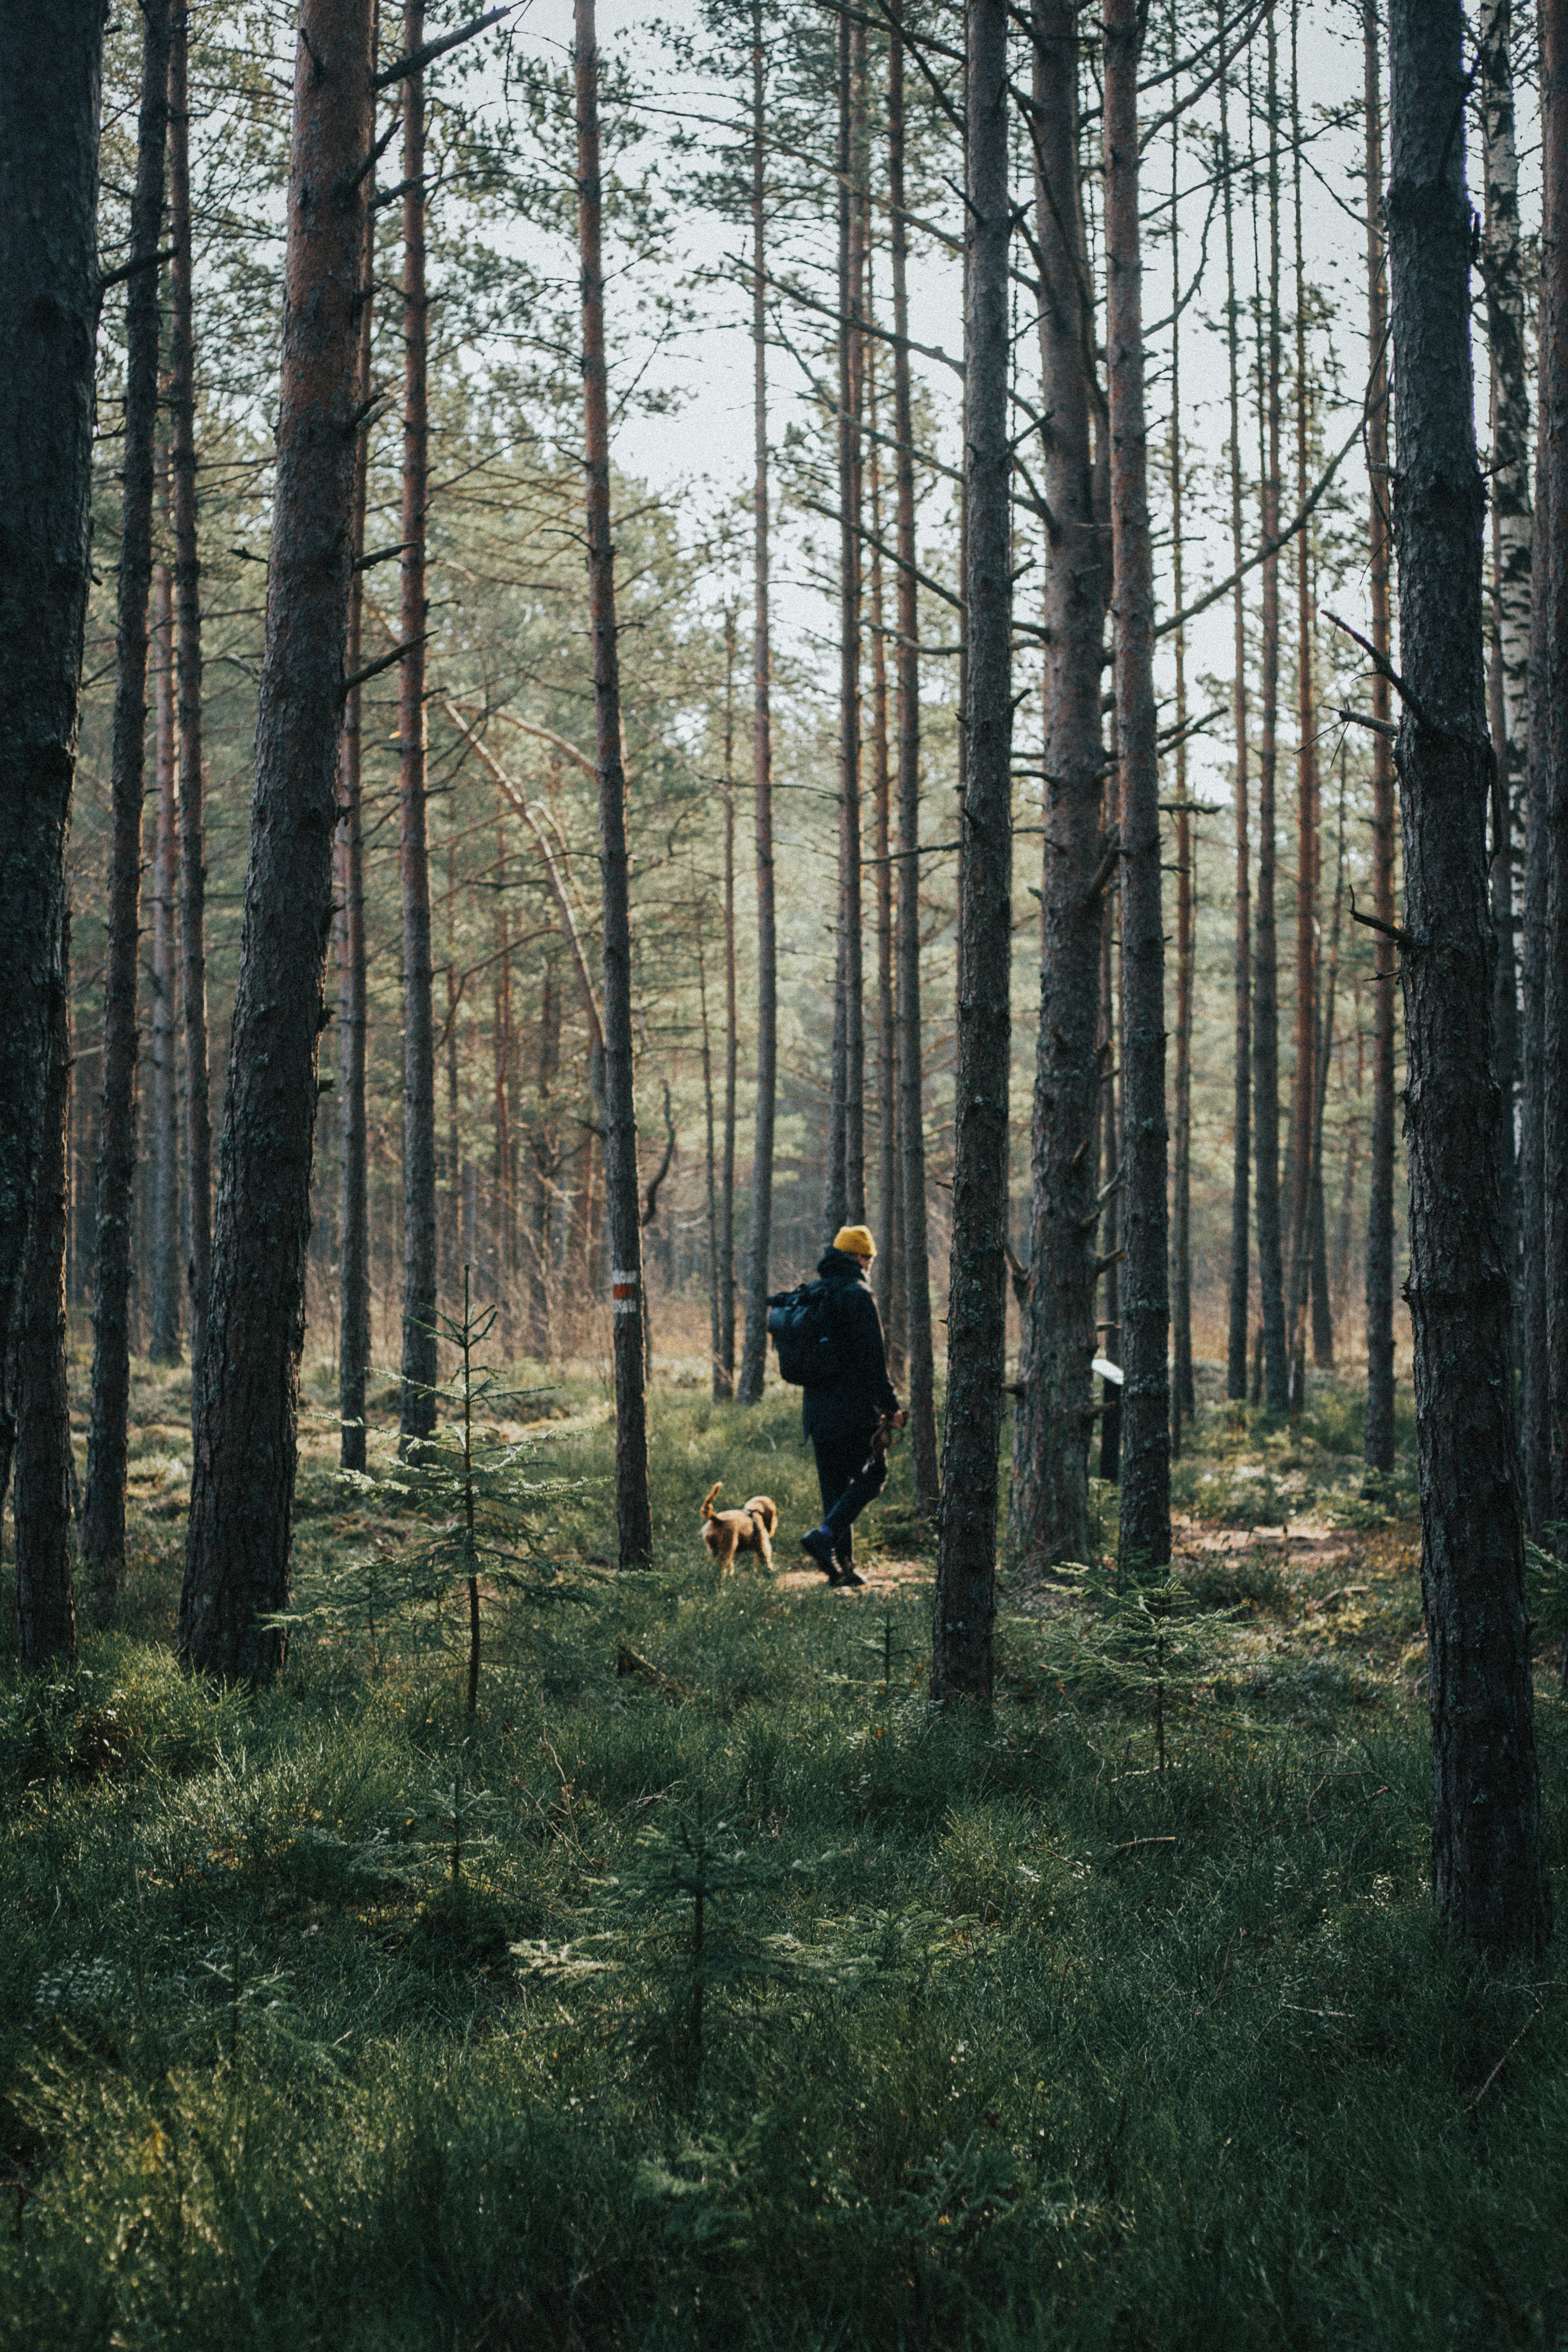 person, nature, trees, miscellanea, miscellaneous, forest, dog, stroll, human